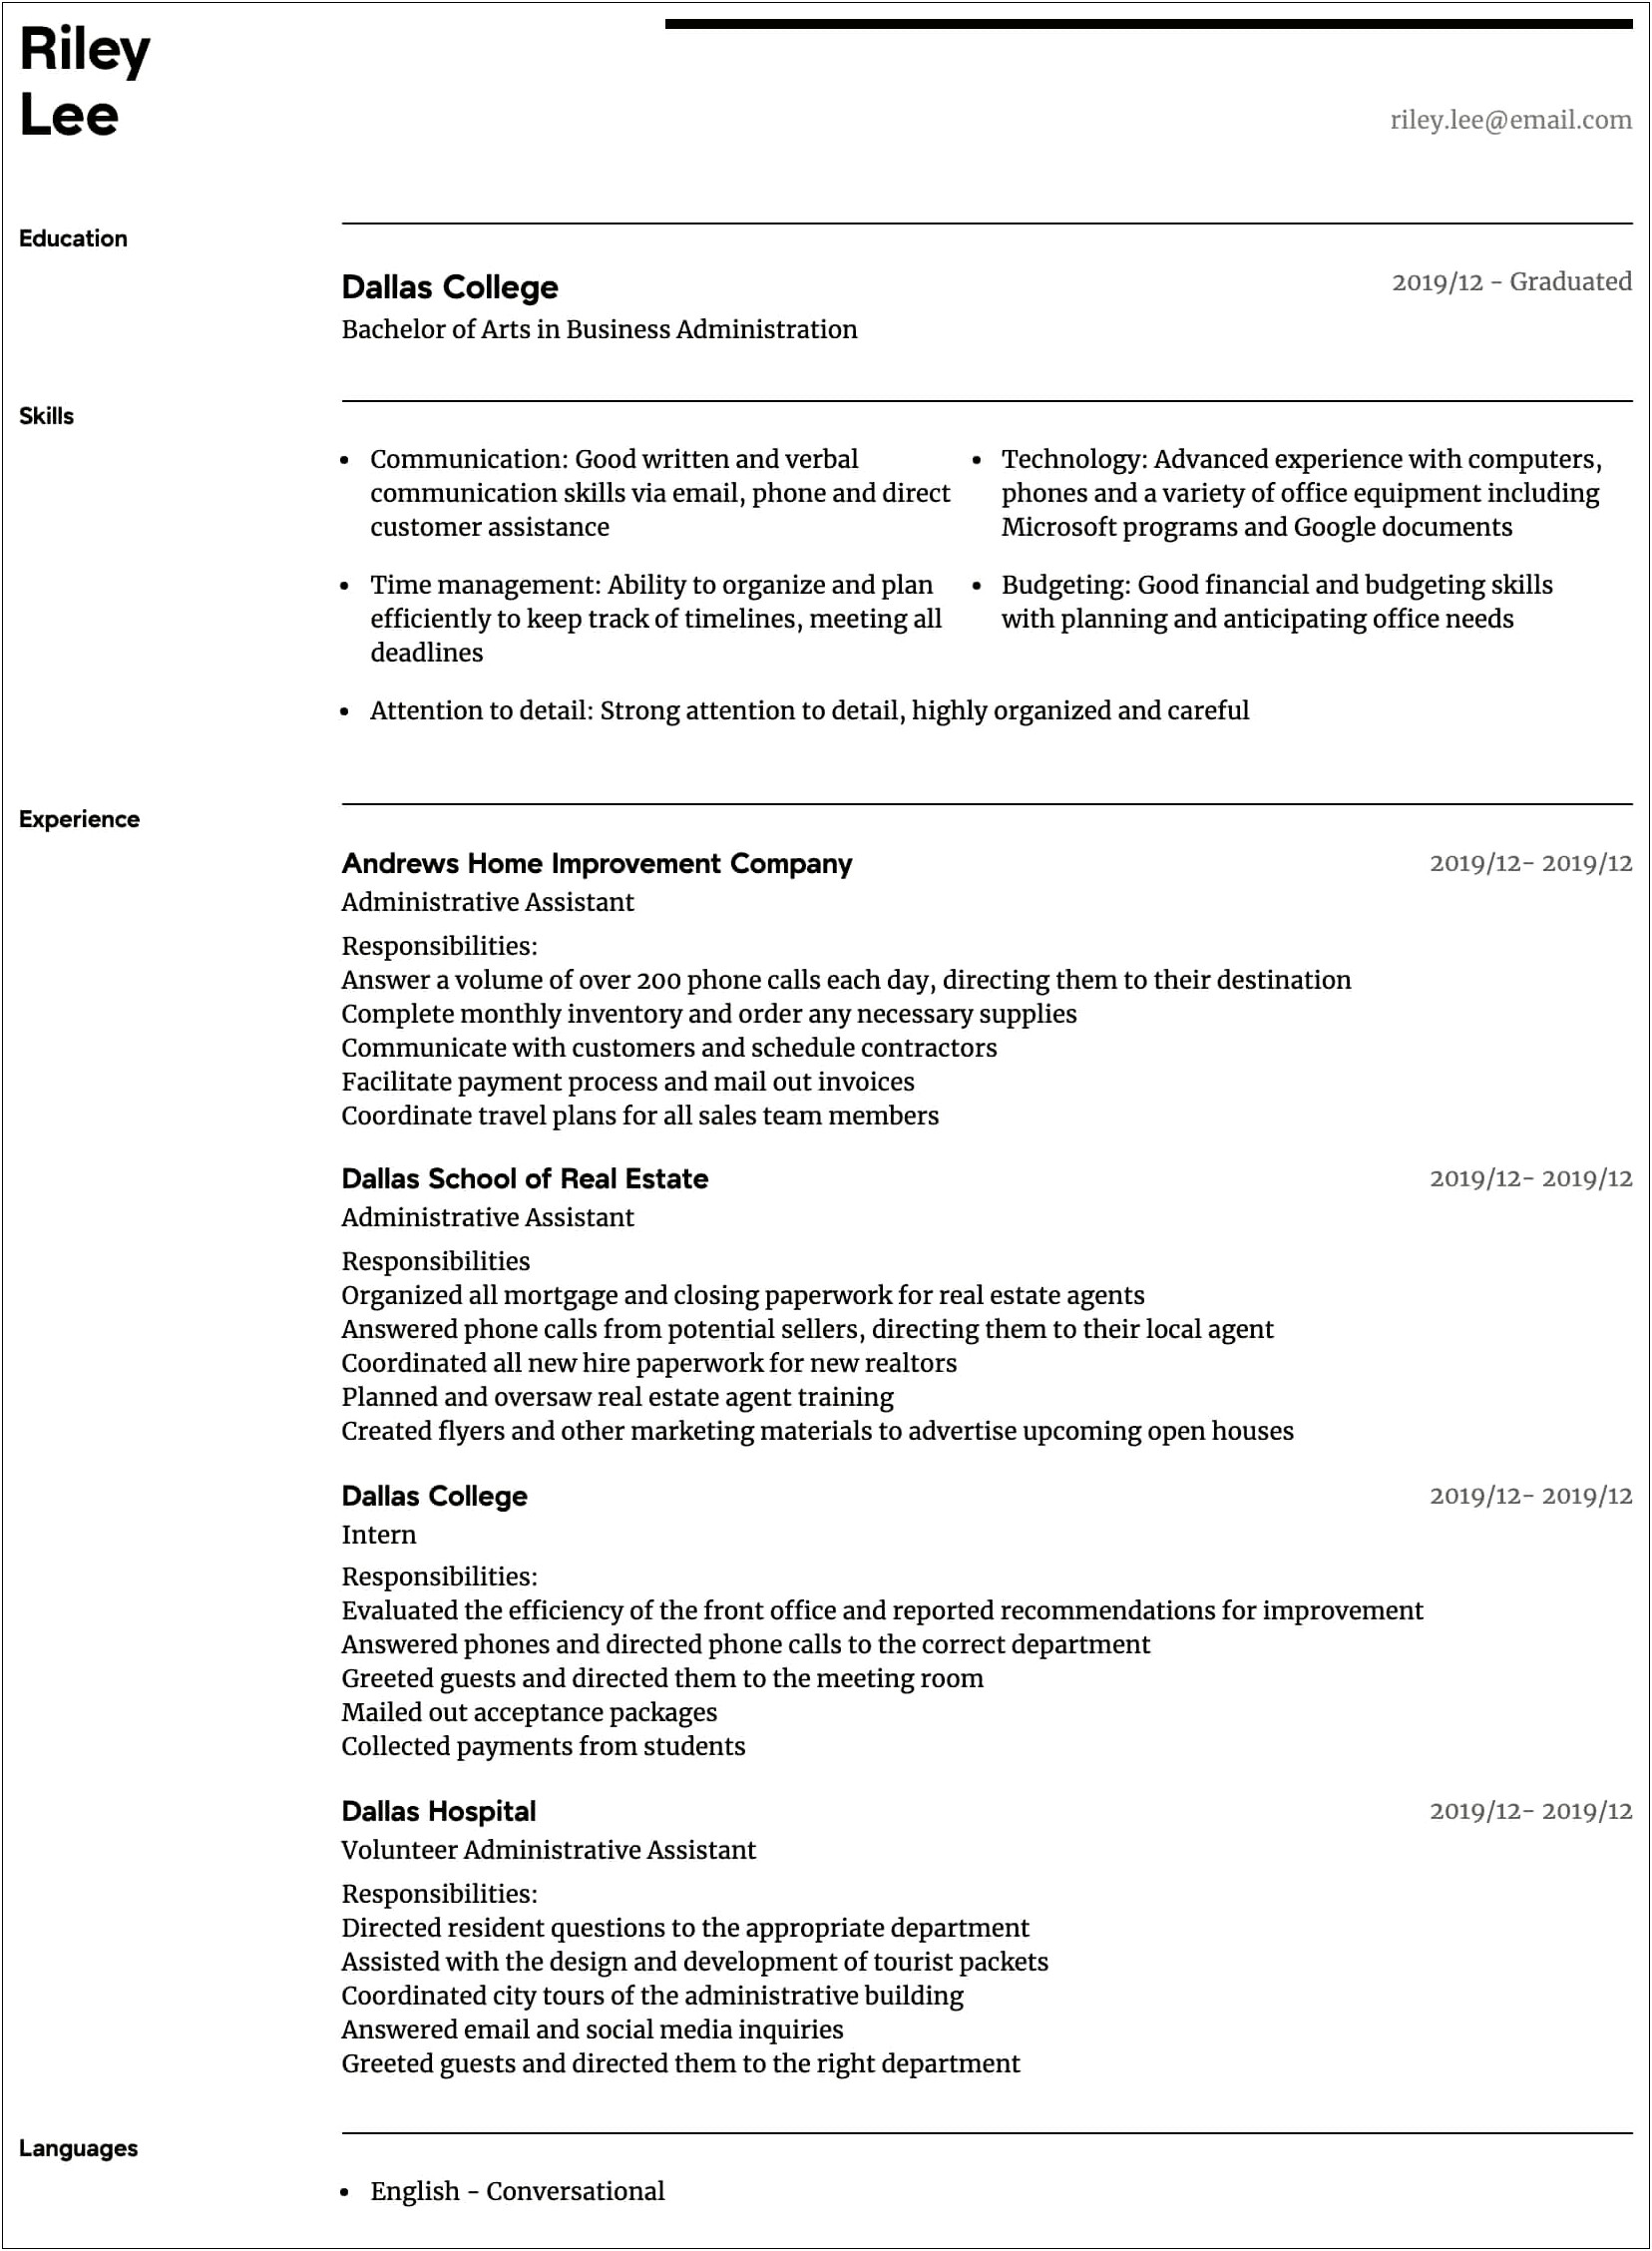 Sample Resume For Administrative Assistant With Summary